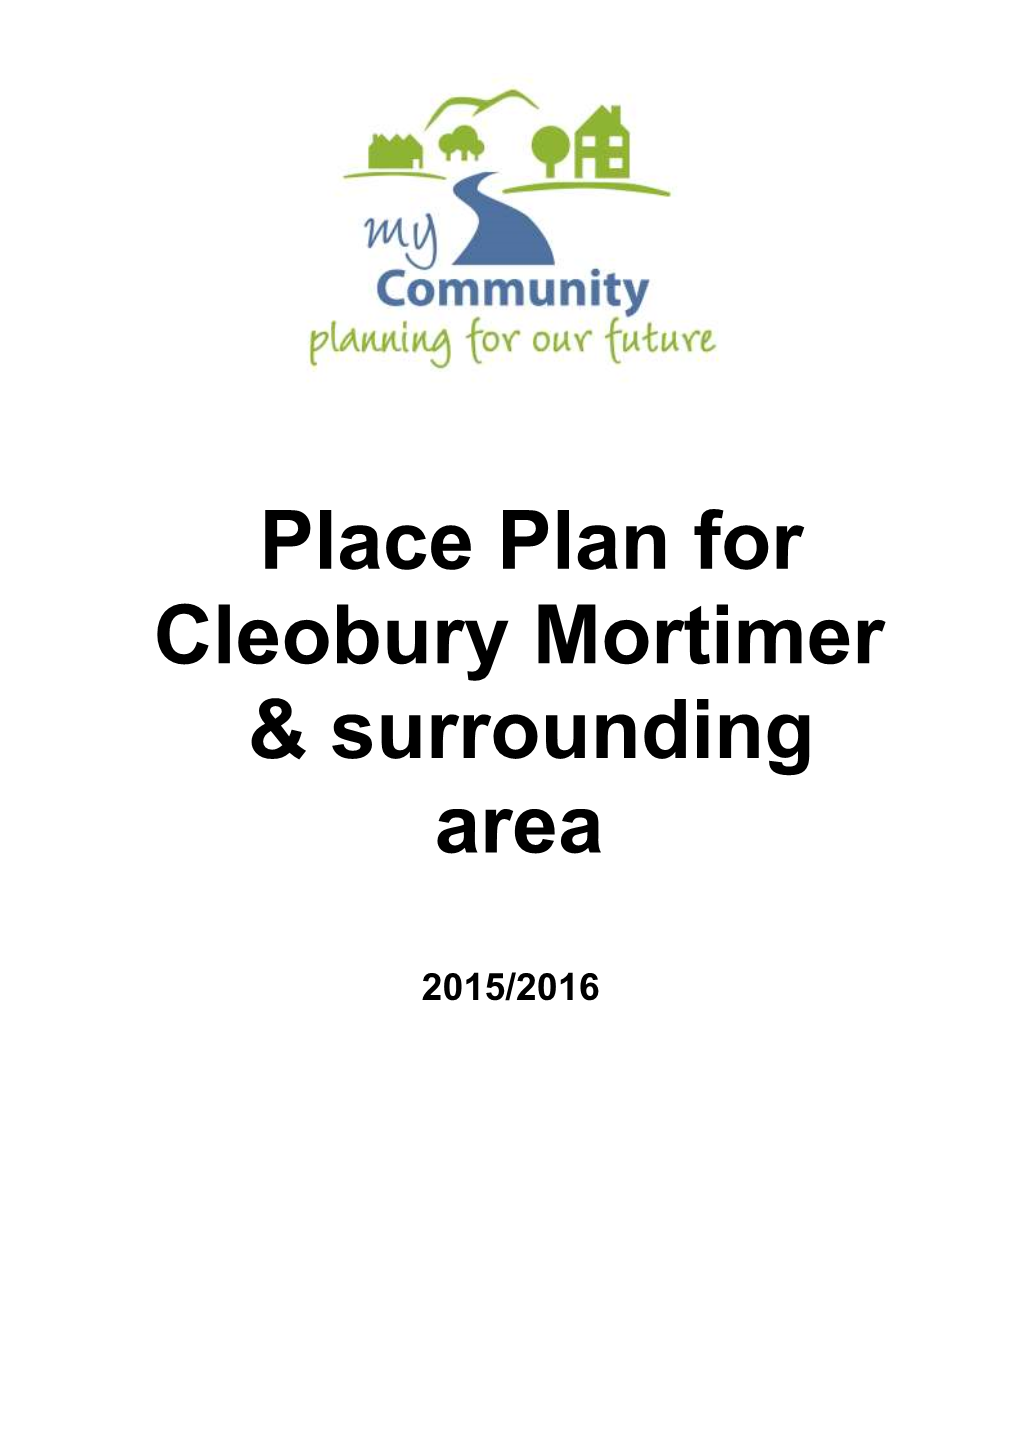 Place Plan for Cleobury Mortimer & Surrounding Area